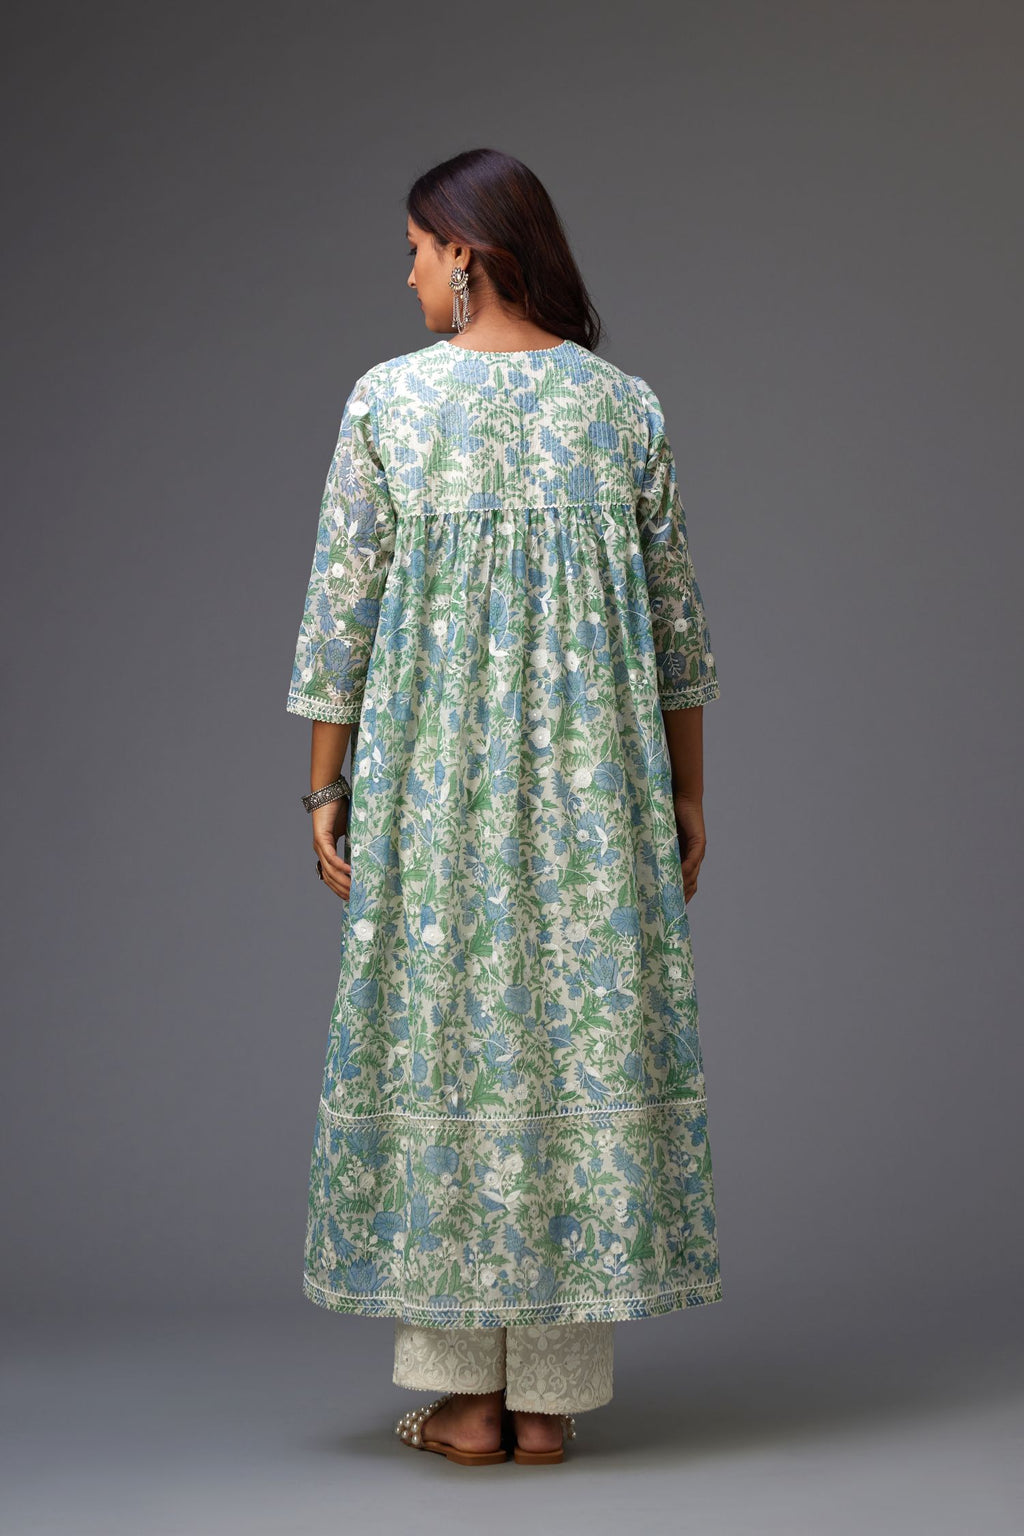 Blue and green hand block printed easy fit kurta dress set detailed with all-over floral jaal embroidery